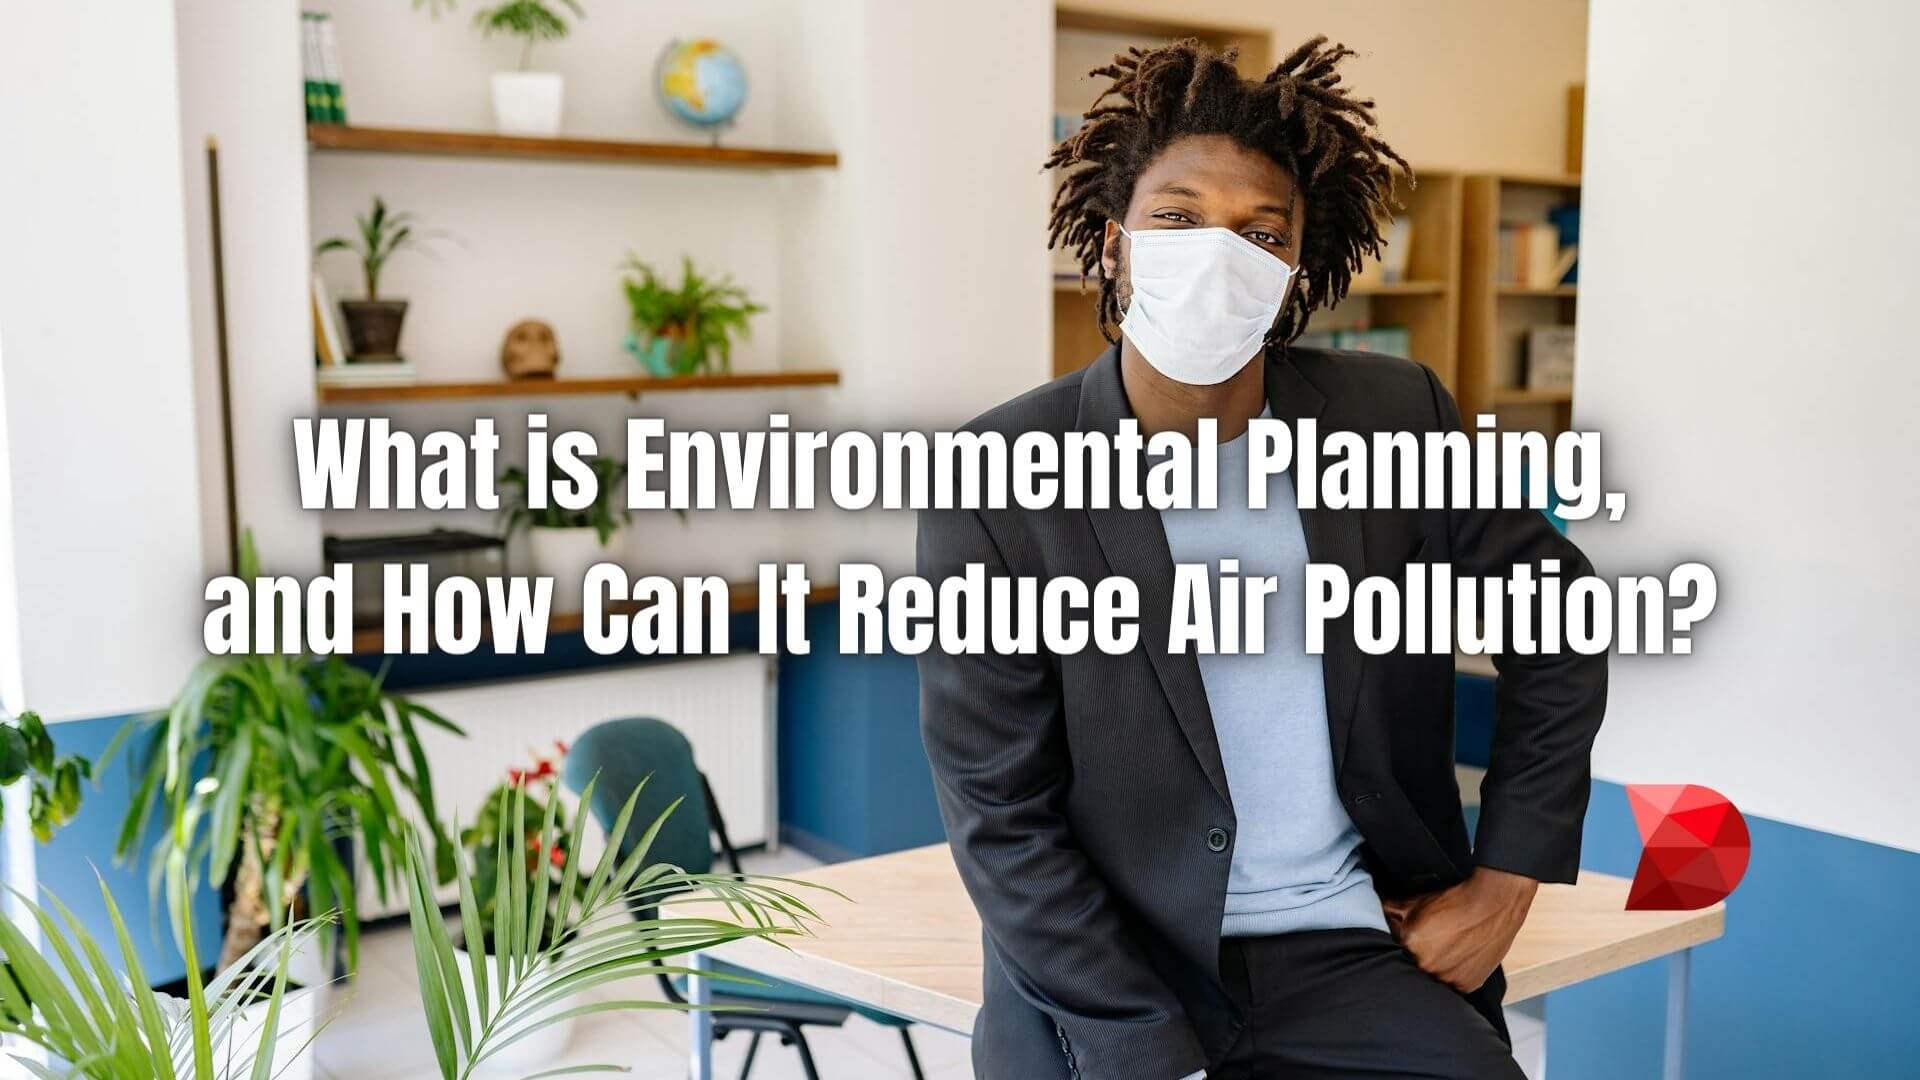 Unlock the secrets of environmental planning and its role in fighting air pollution. Discover actionable insights in our comprehensive guide.